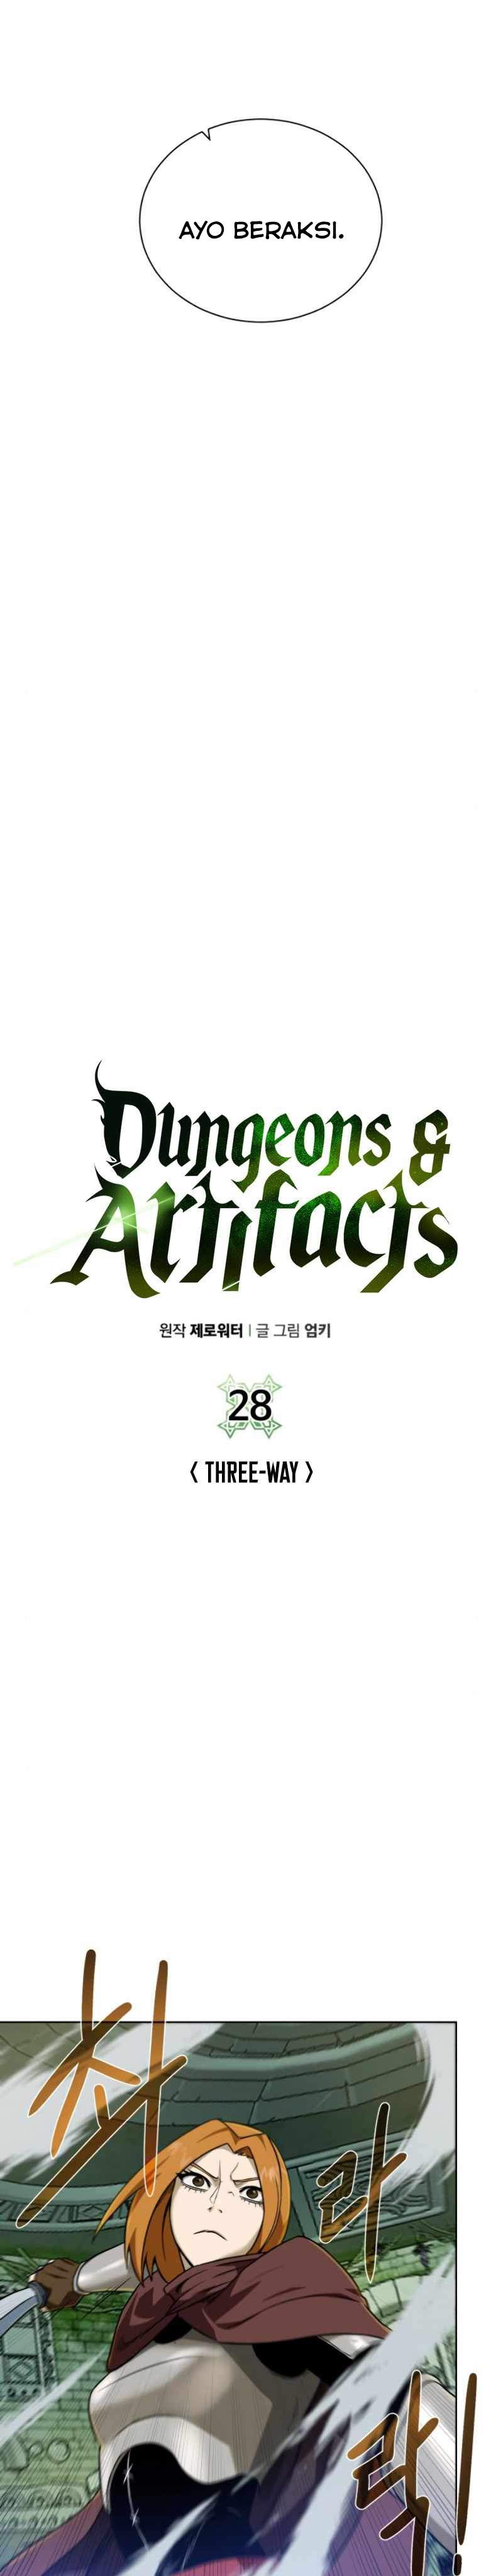 Dungeon and Artifact Chapter 28